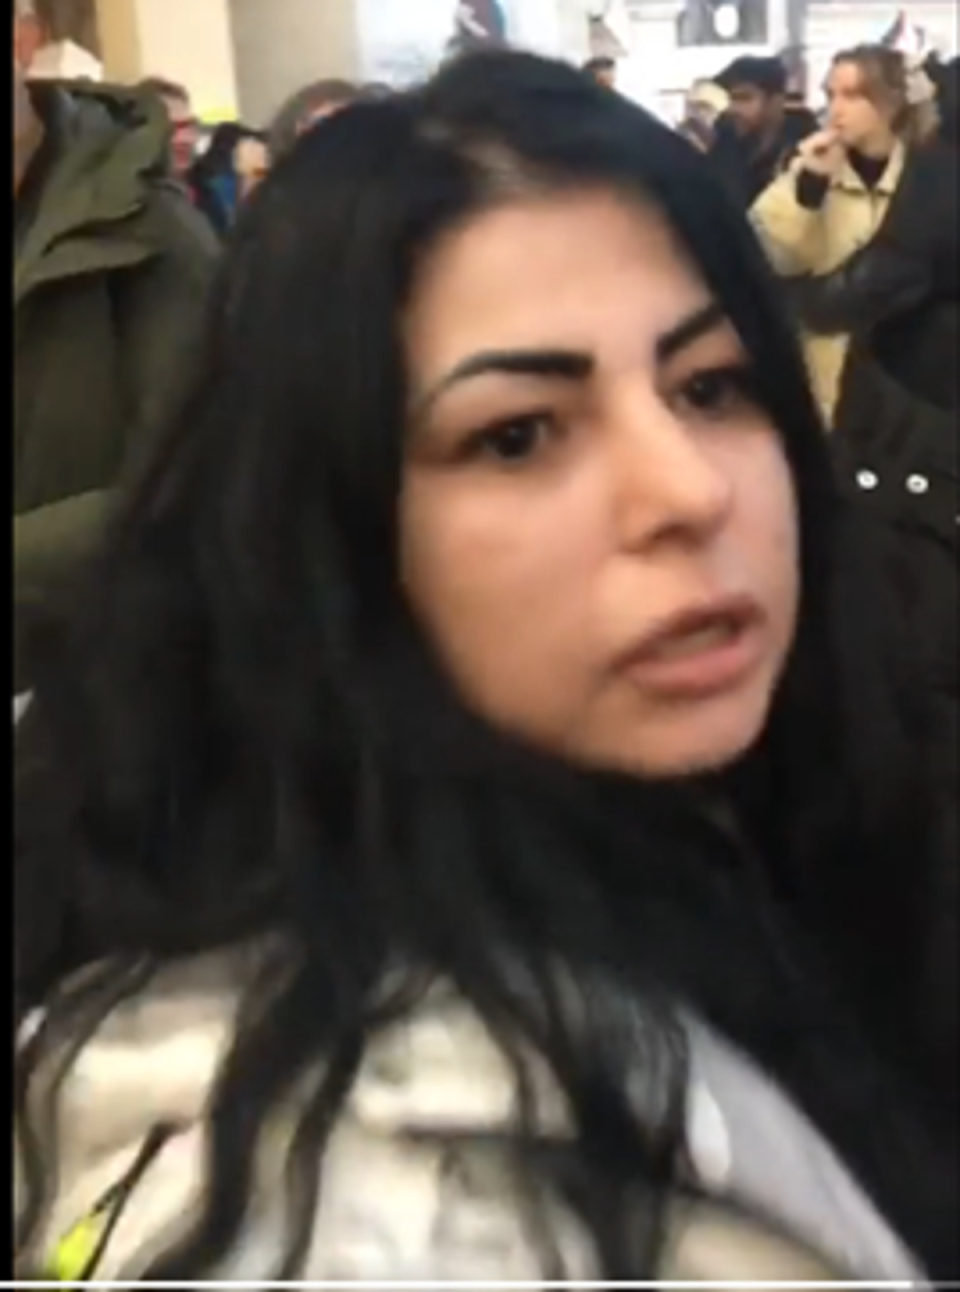 Officers are today releasing this image following an anti-semitic hate crime at Victoria Station yesterday, 11 November. The woman has dark sculpted eyebrows and wore a grey hoodie. (The British Transport Police)